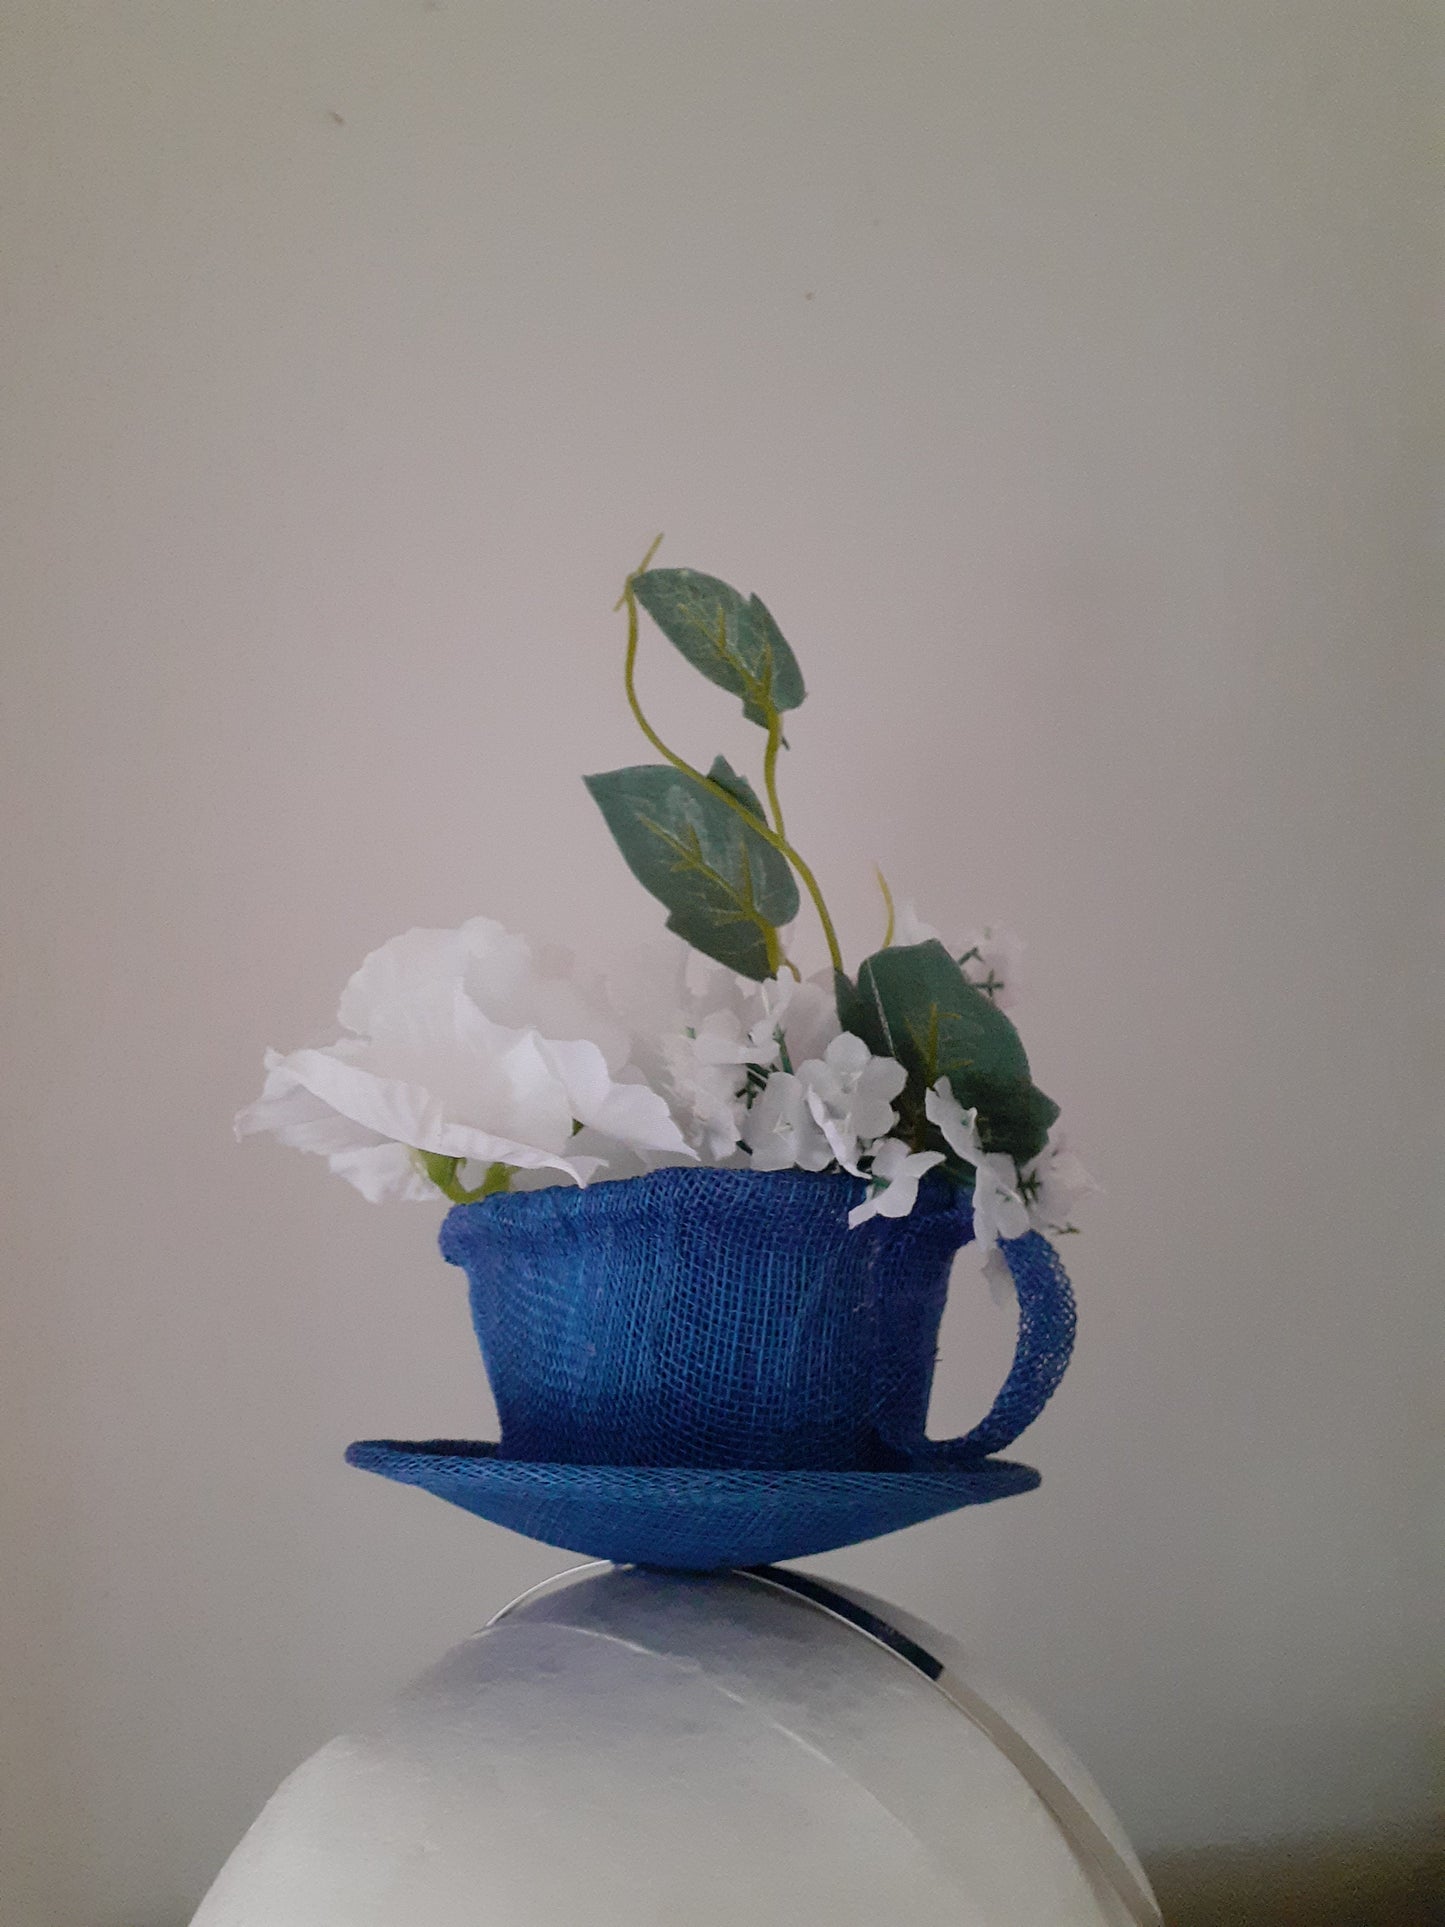 Royal blue sinamay cup and saucer headpiece